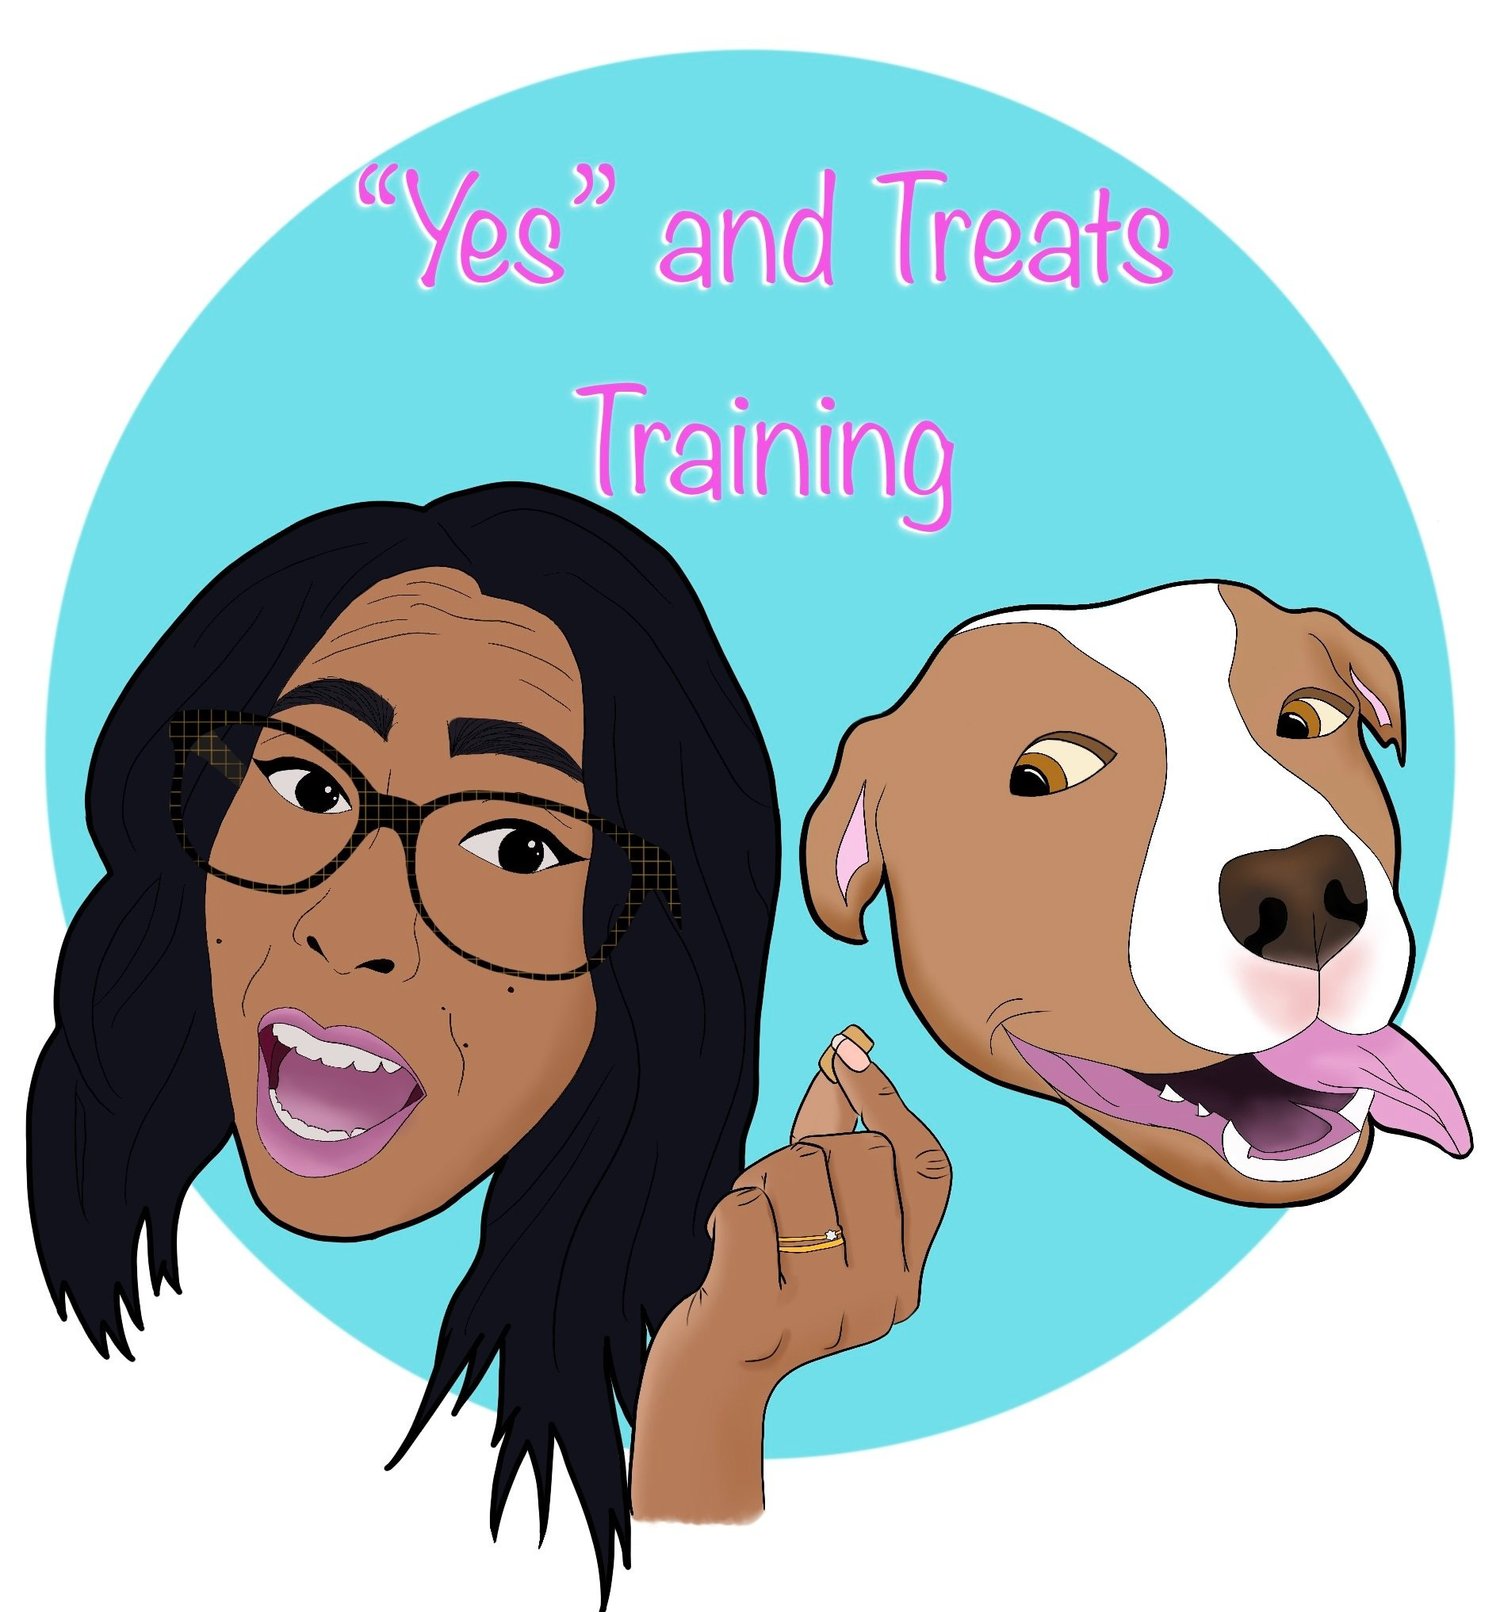 &quot;Yes&quot; and Treats Training